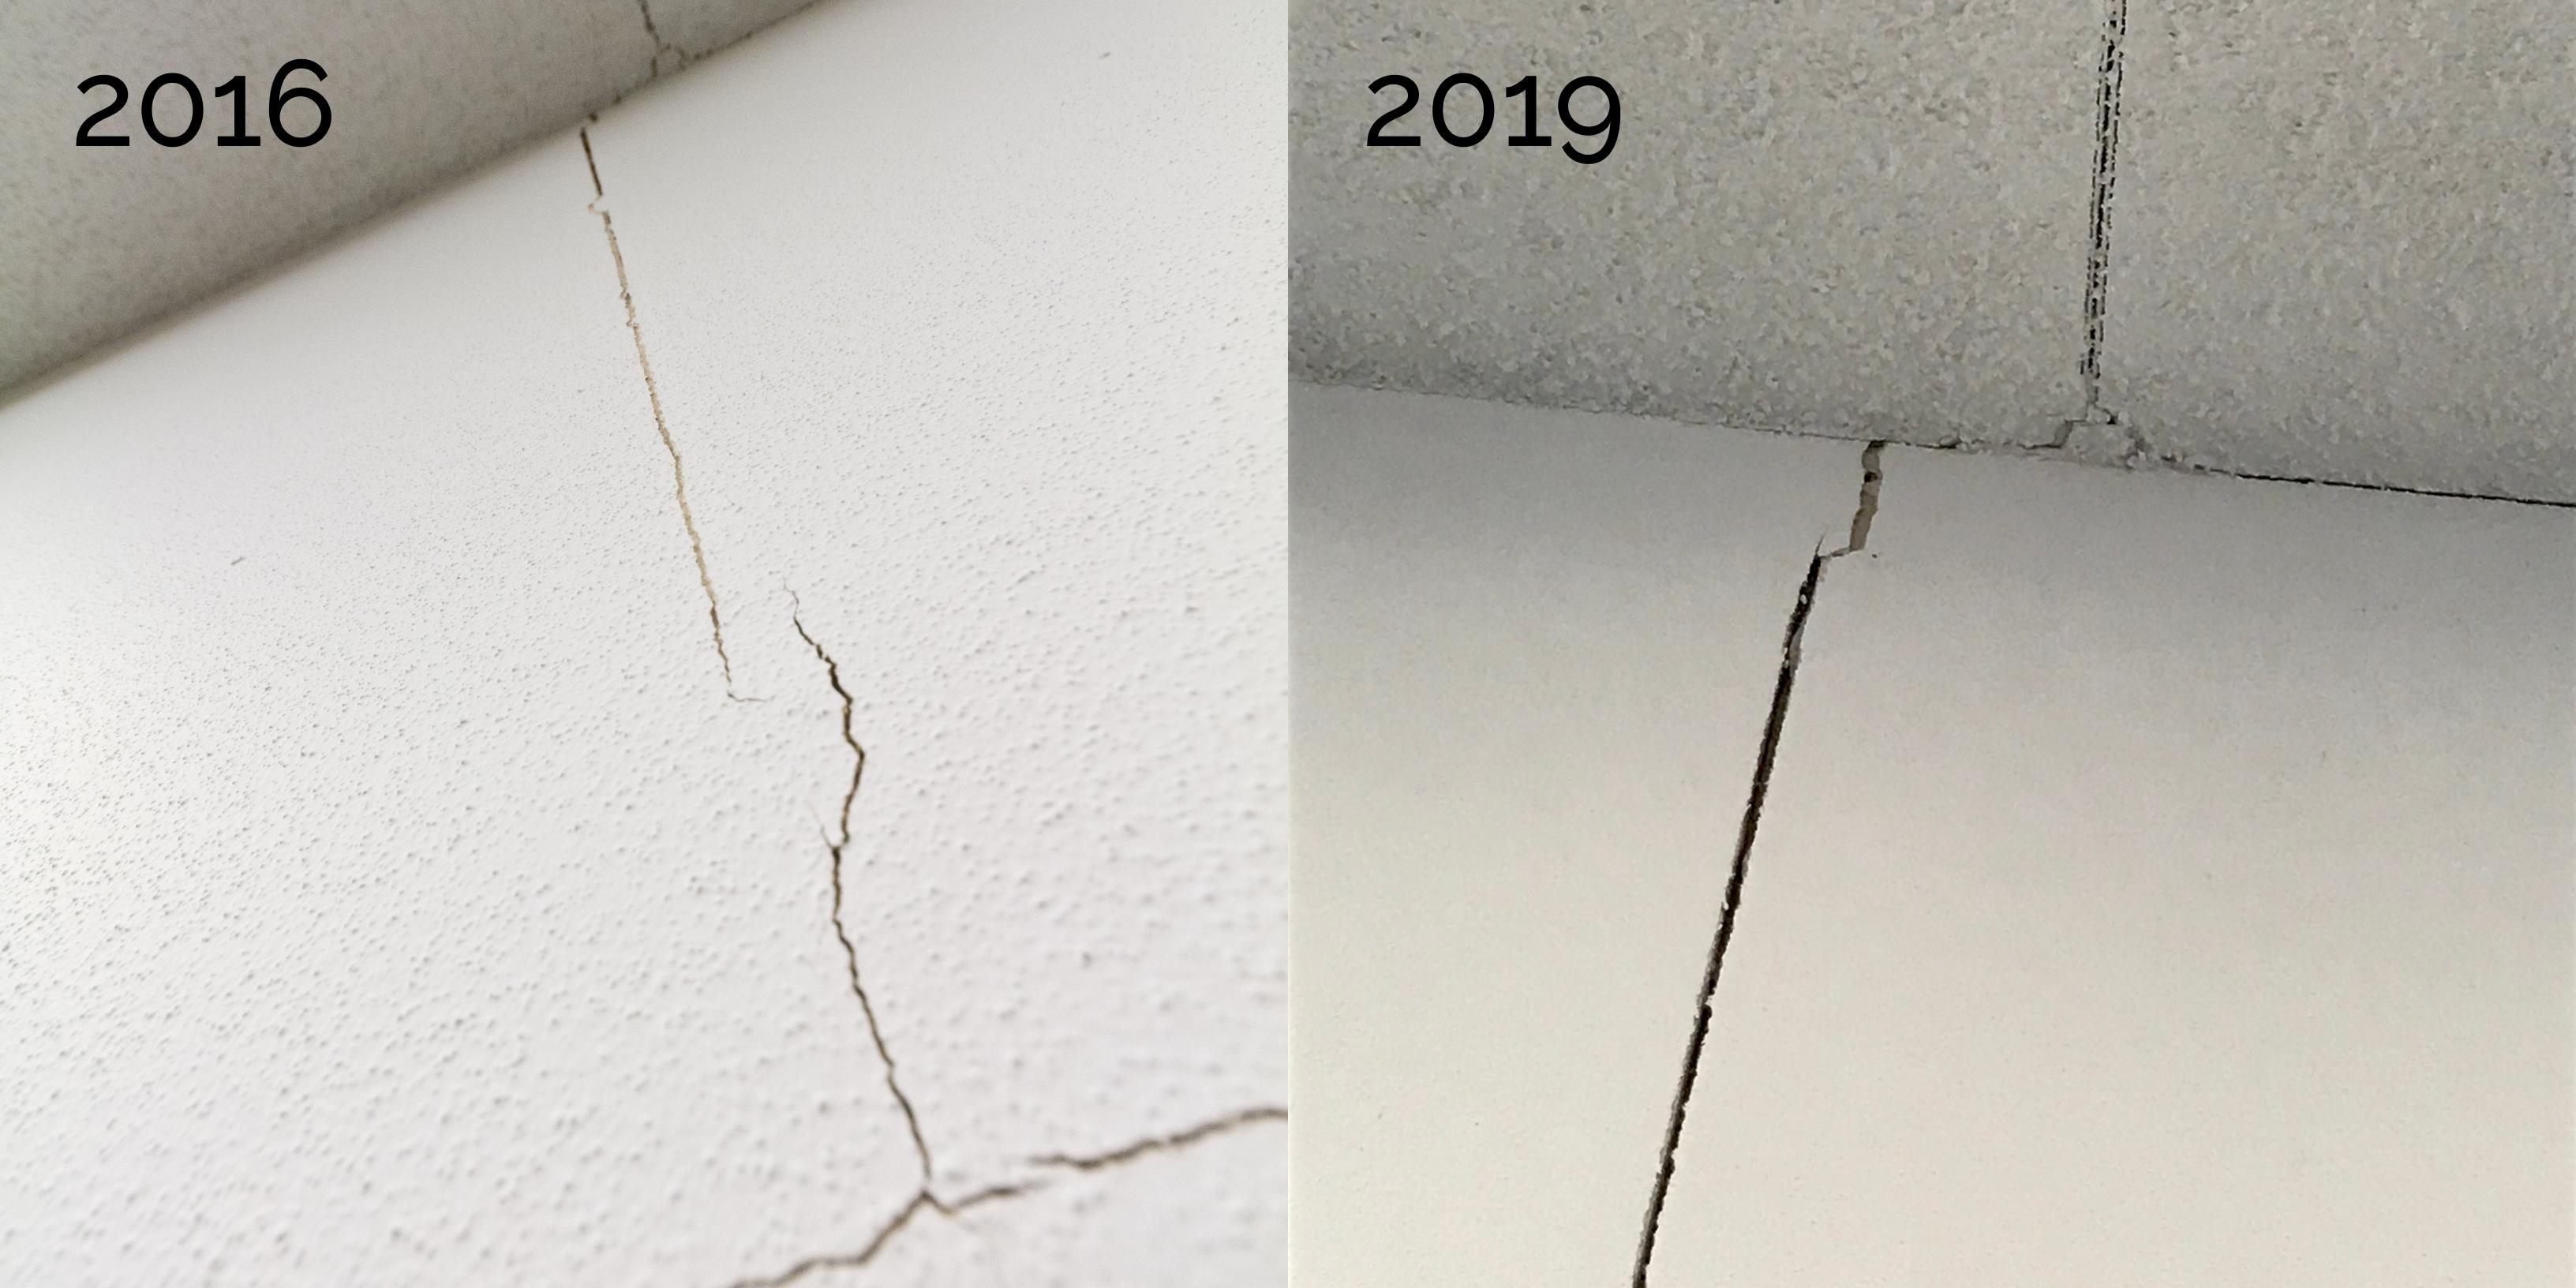 Wall crack expansion between 2016 and 2019